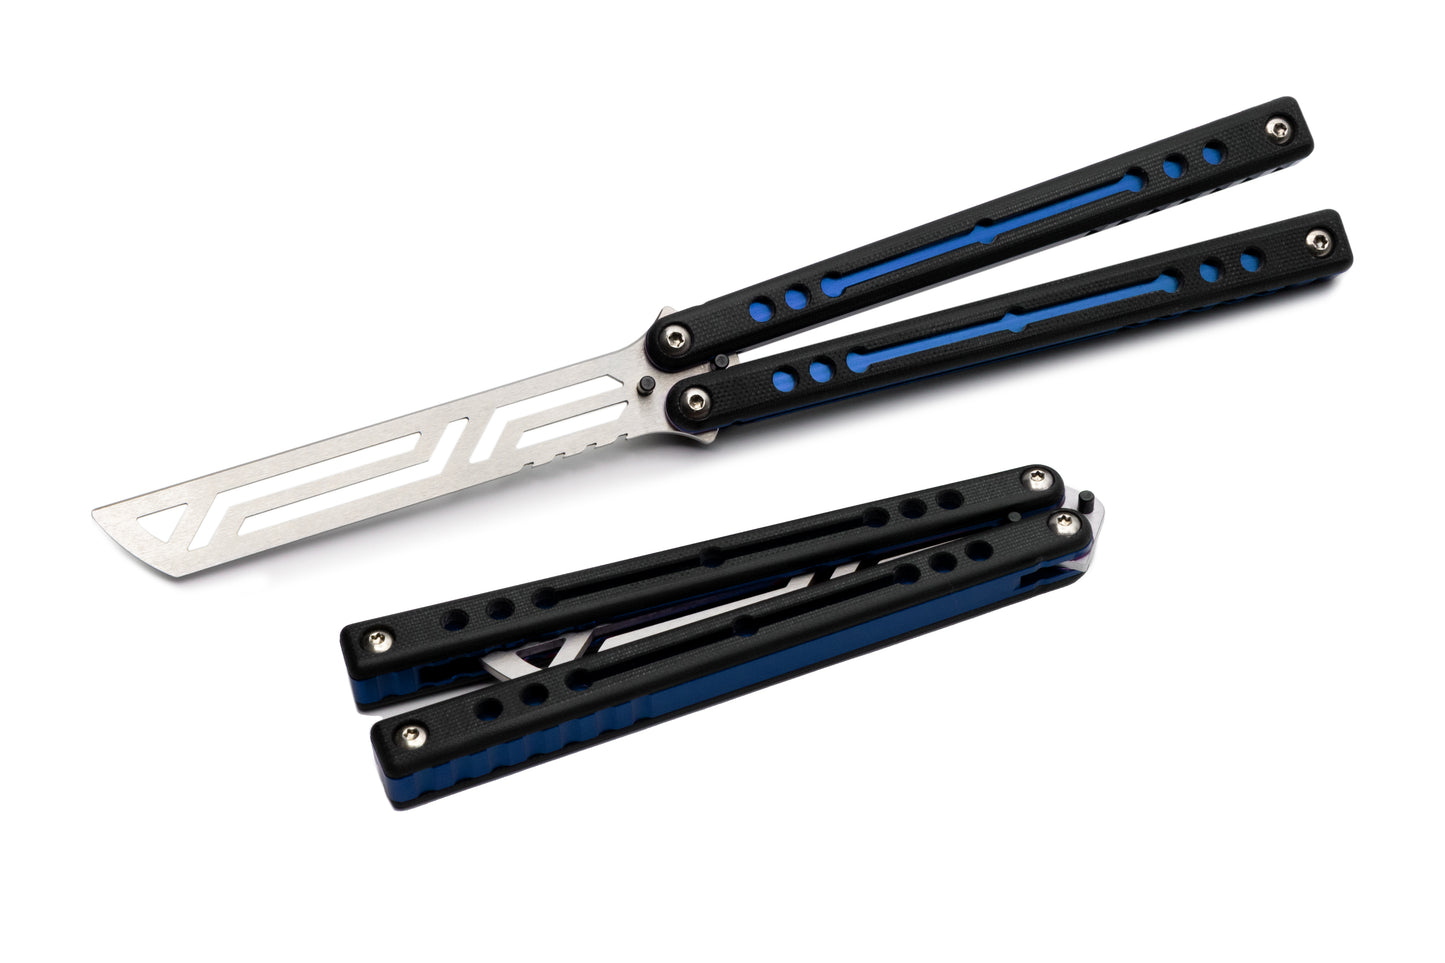 Blue NautilusV2 balisong with g10 scales